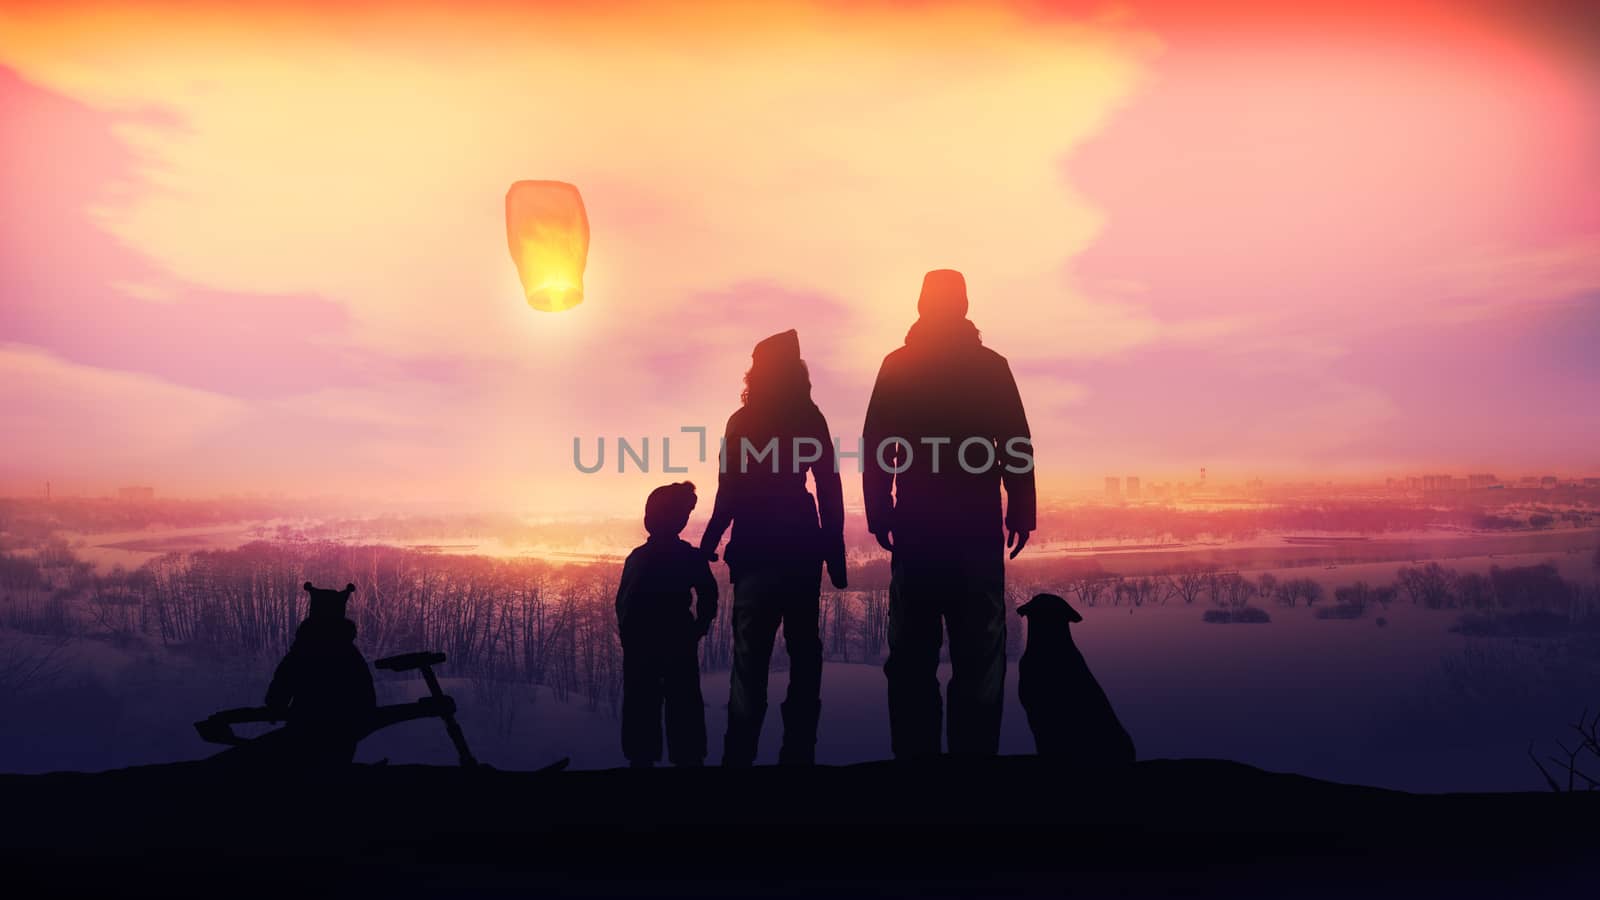 Family launches Chinese lantern on the evening winter walk. by ConceptCafe